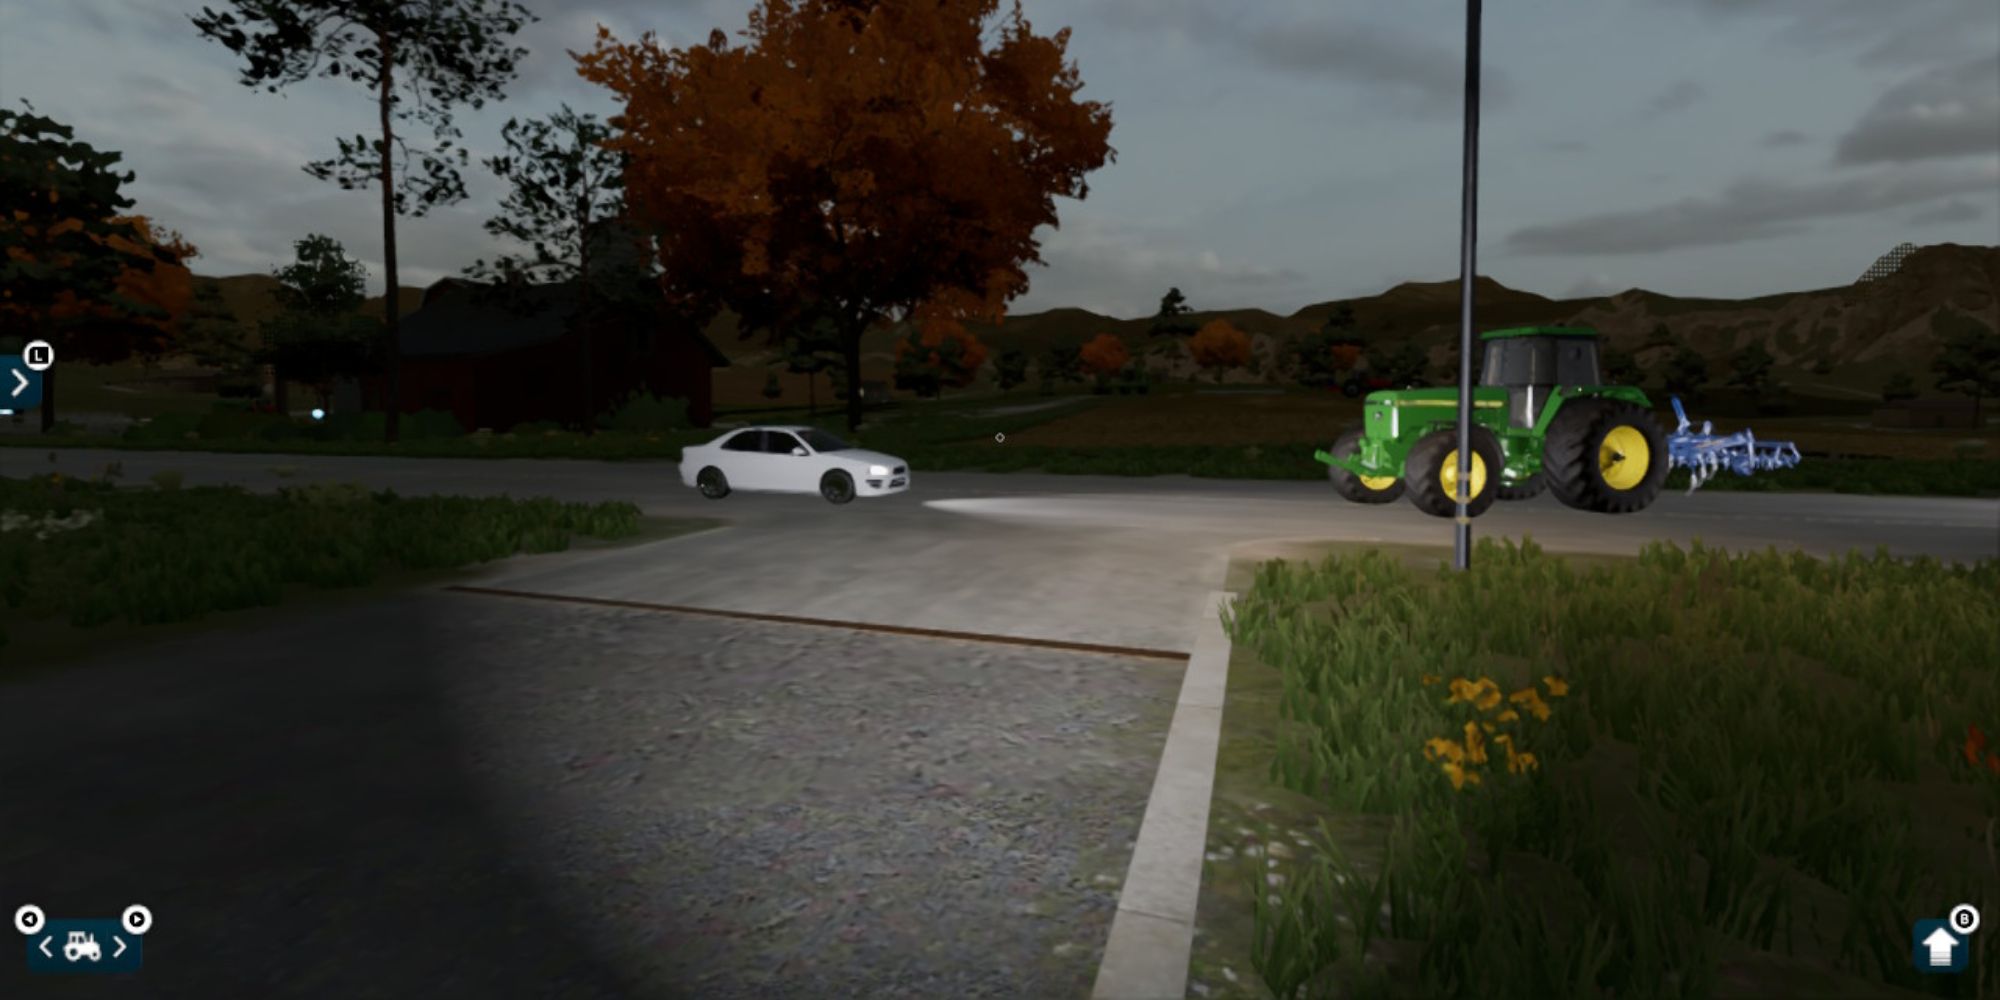 Farming Sim 23 first person at night with a cultivator sitting on the road next to a white car